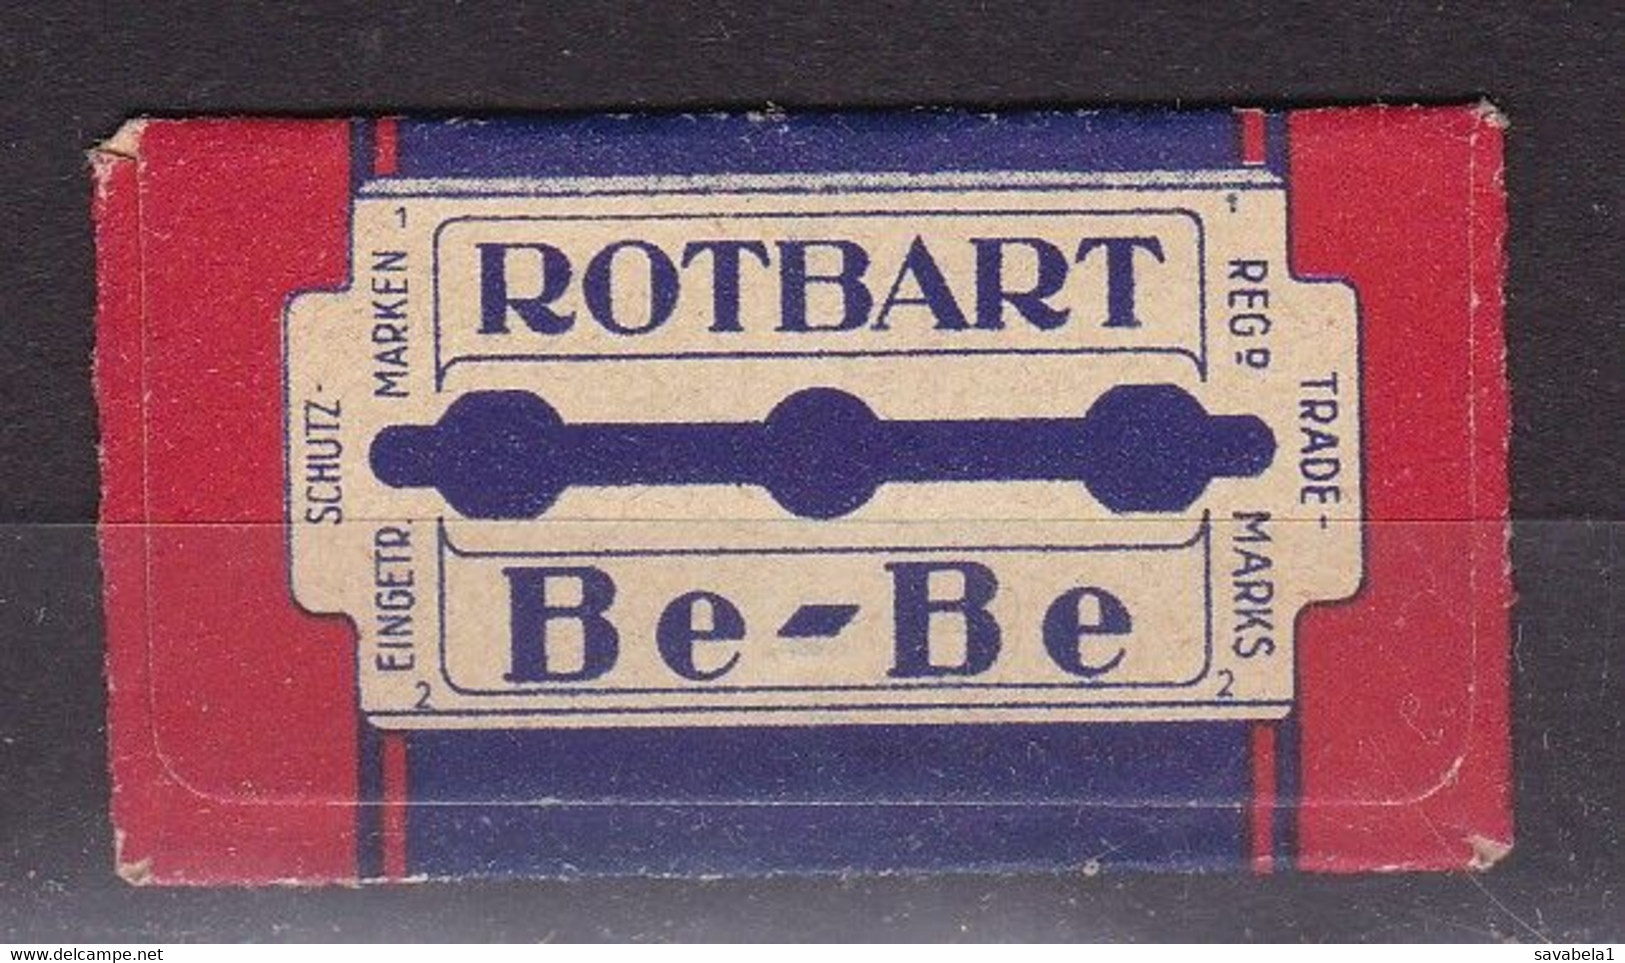 Razor Blades Old Vintage Cover Only Rotbart Be Be - Lames De Rasoir